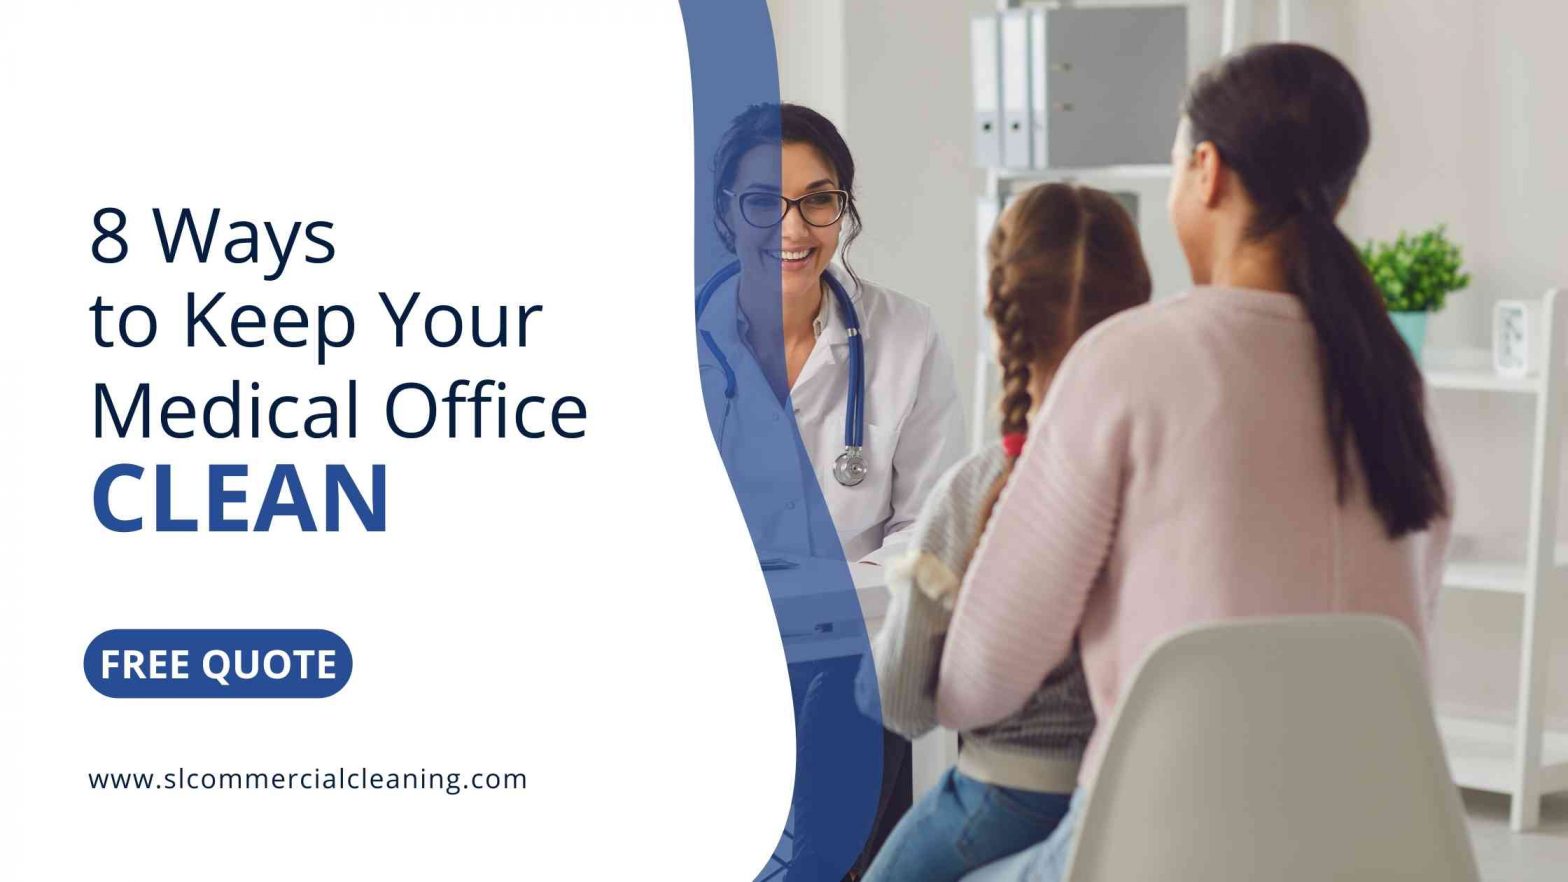 Keep Your Medical Office Clean